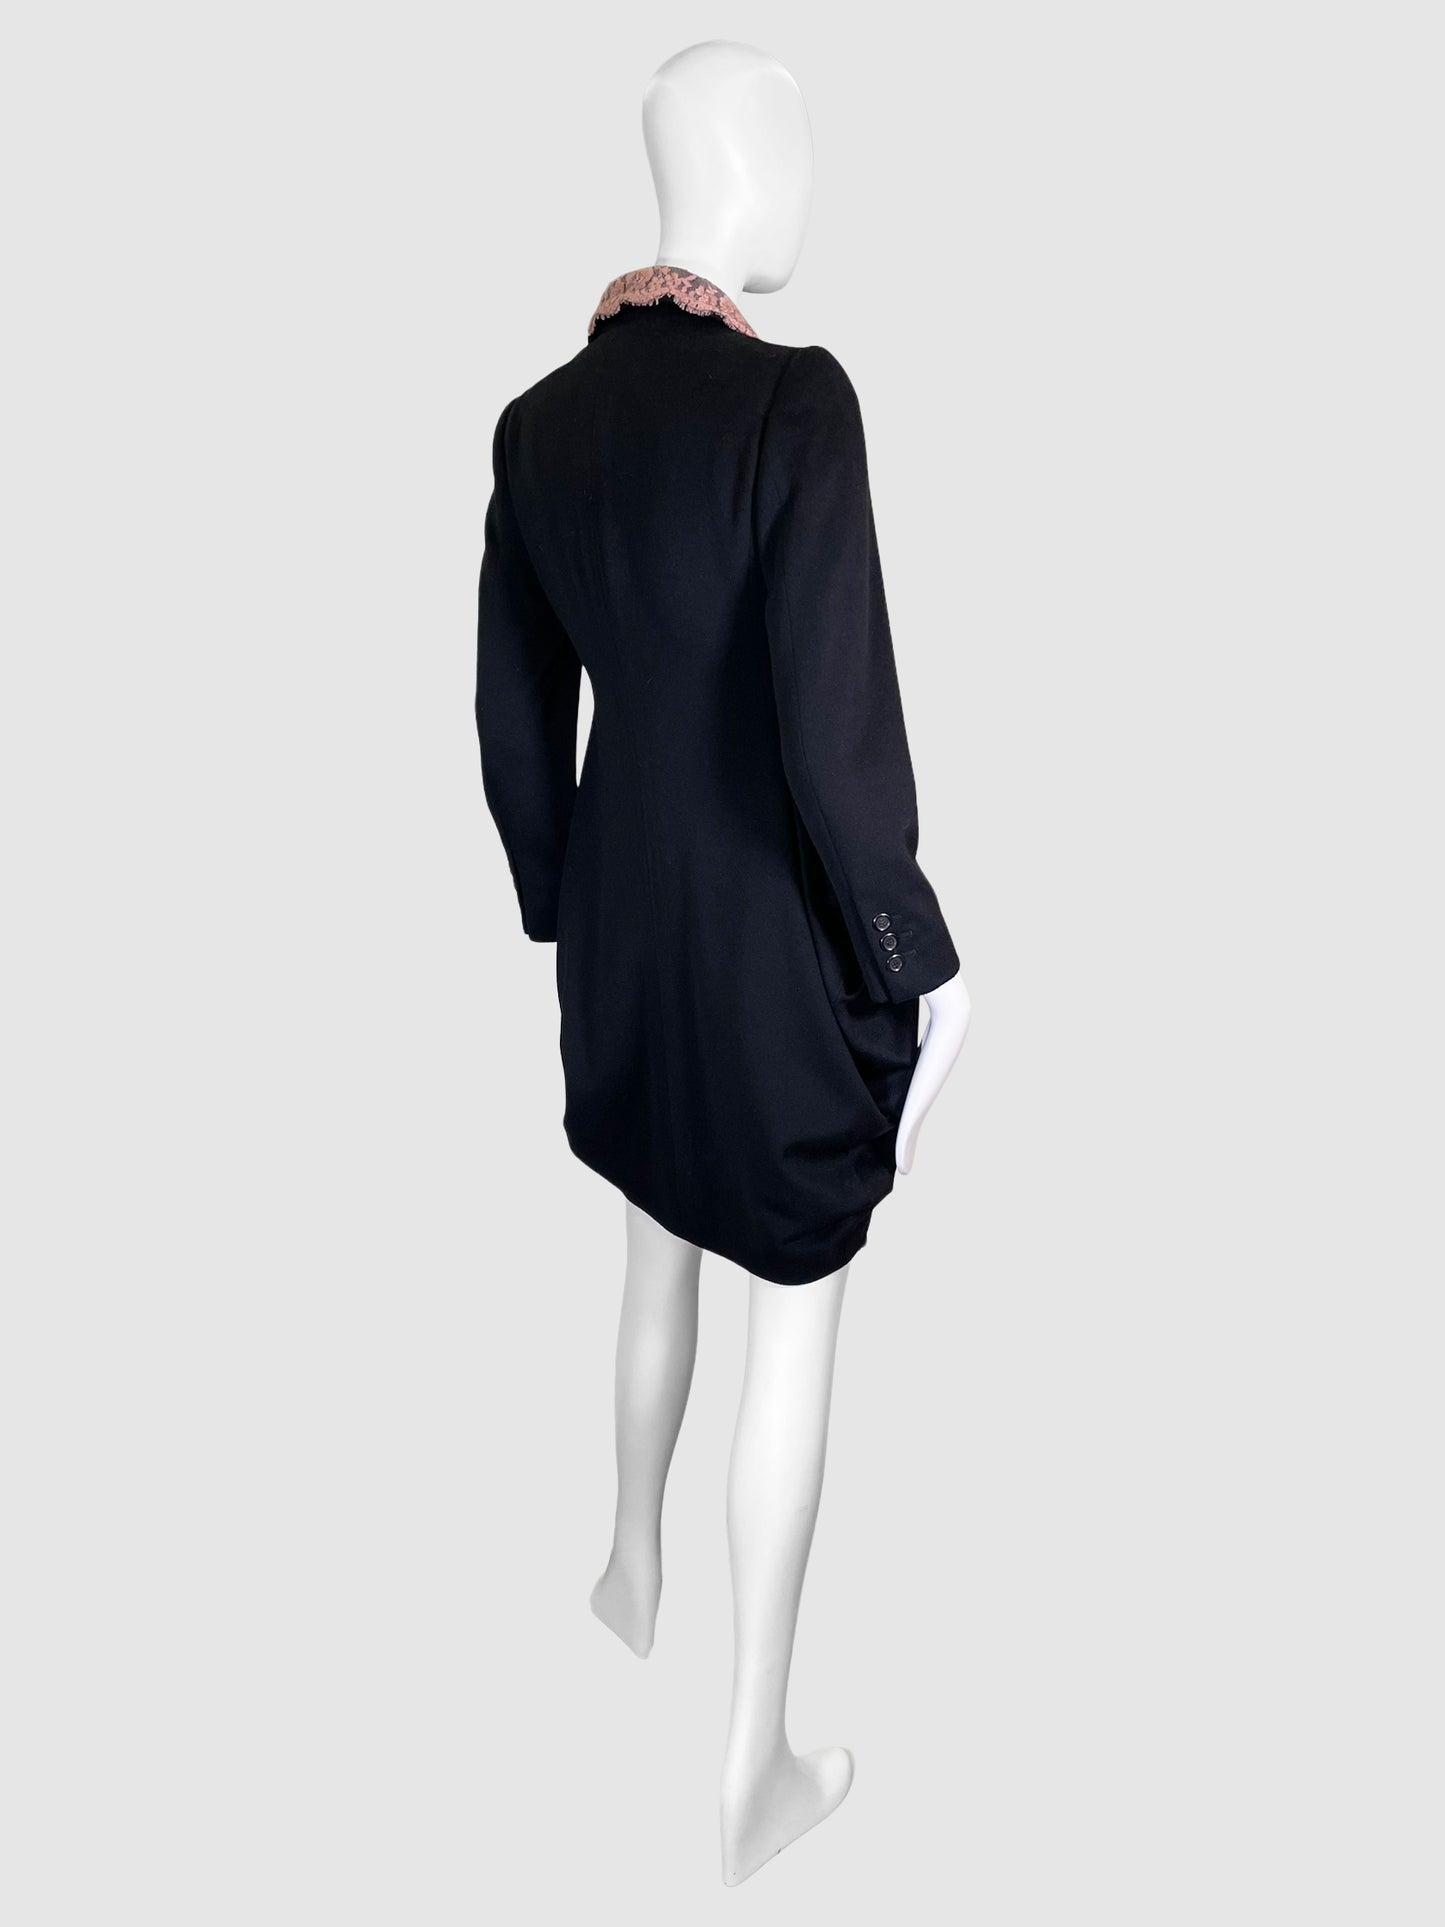 Moschino Wool Coat with Lace Details - Size 40